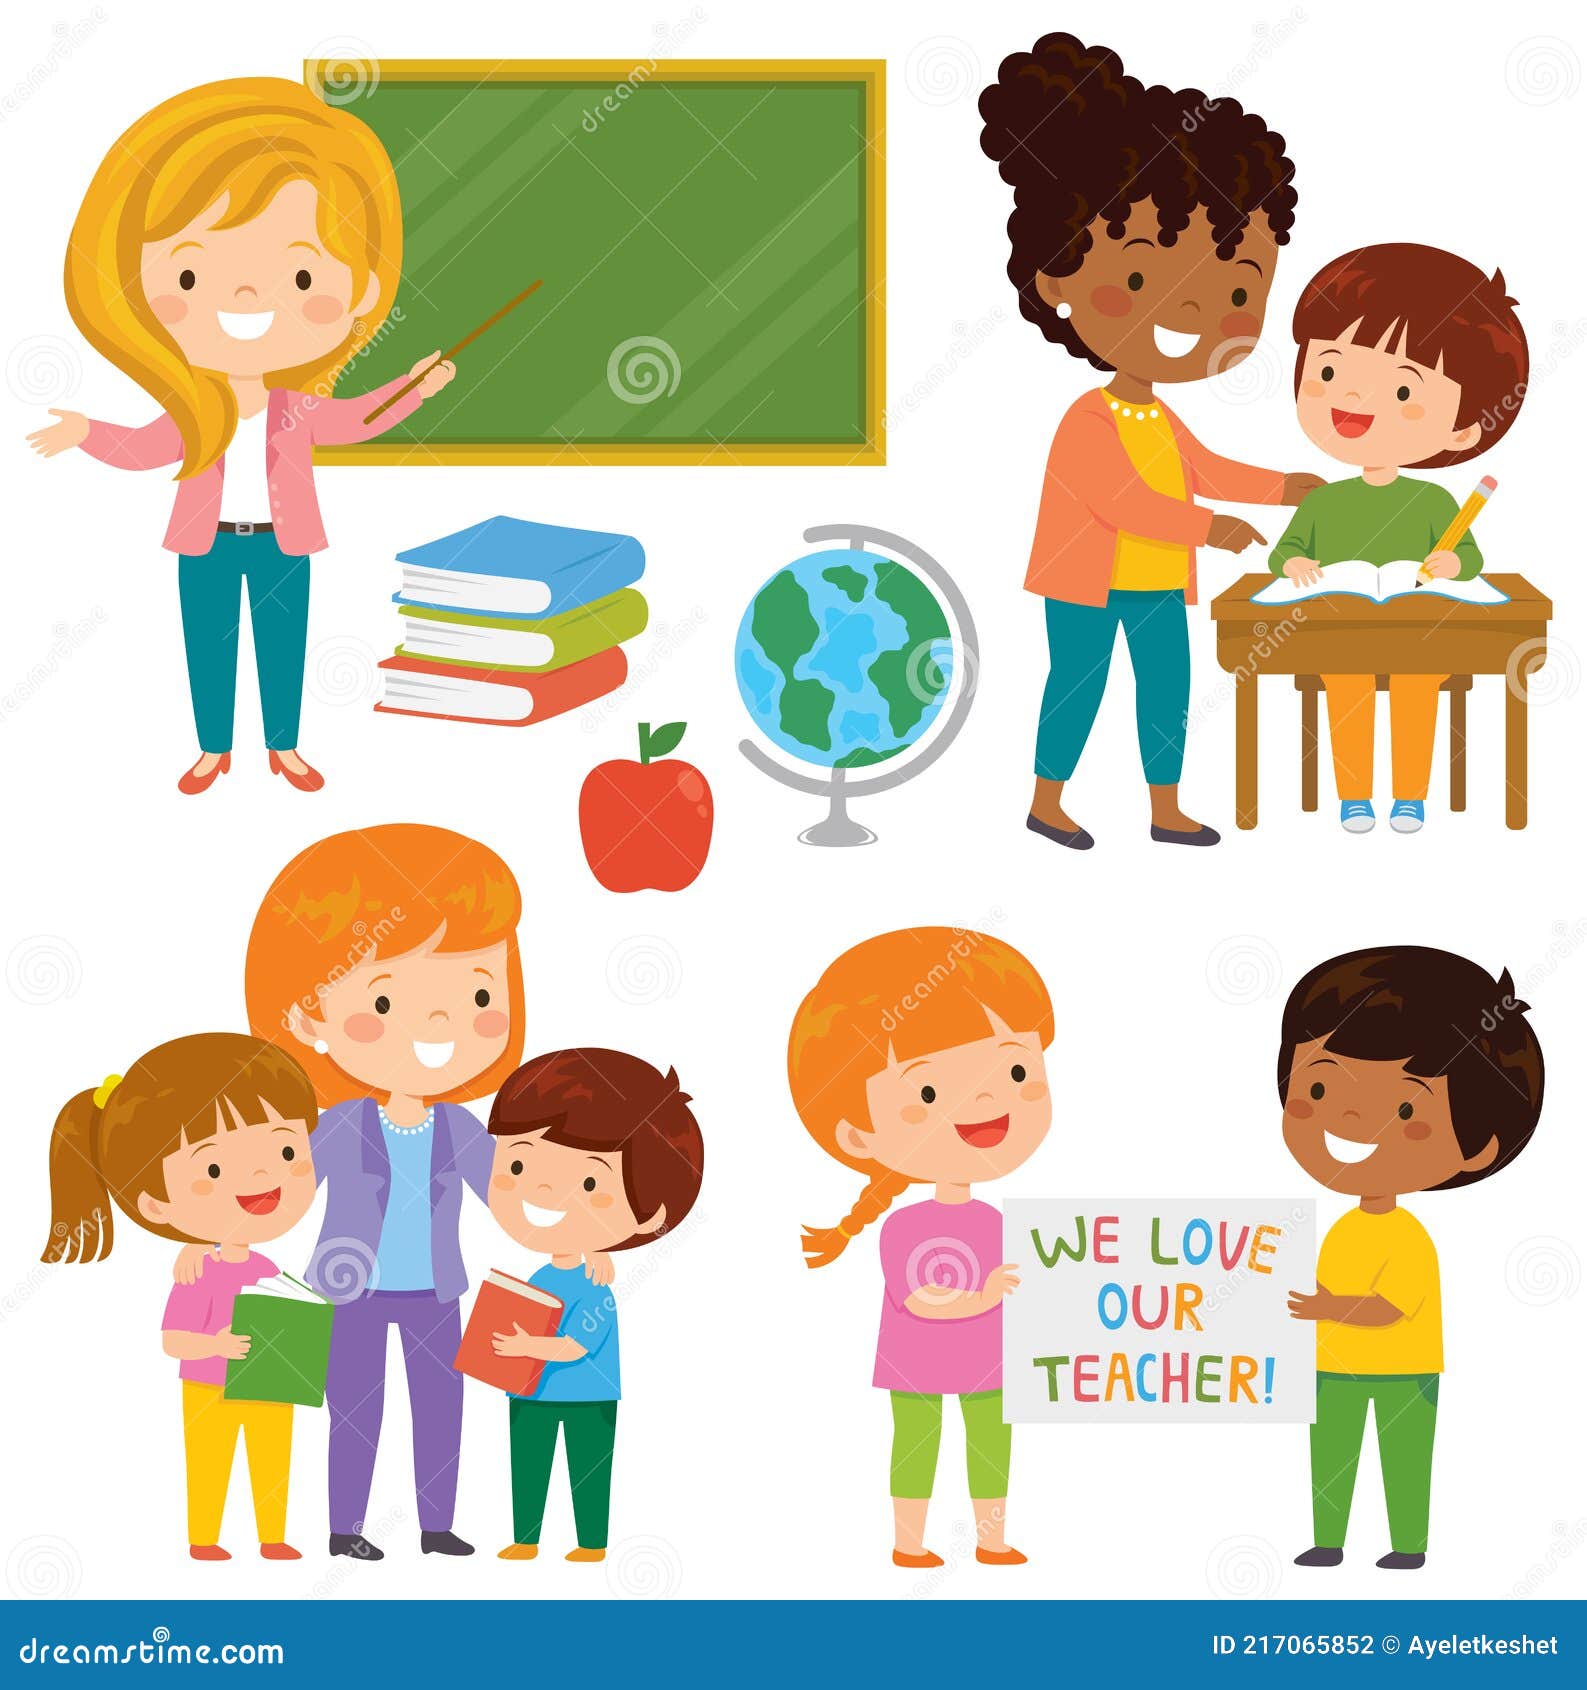 teachers and students clipart set